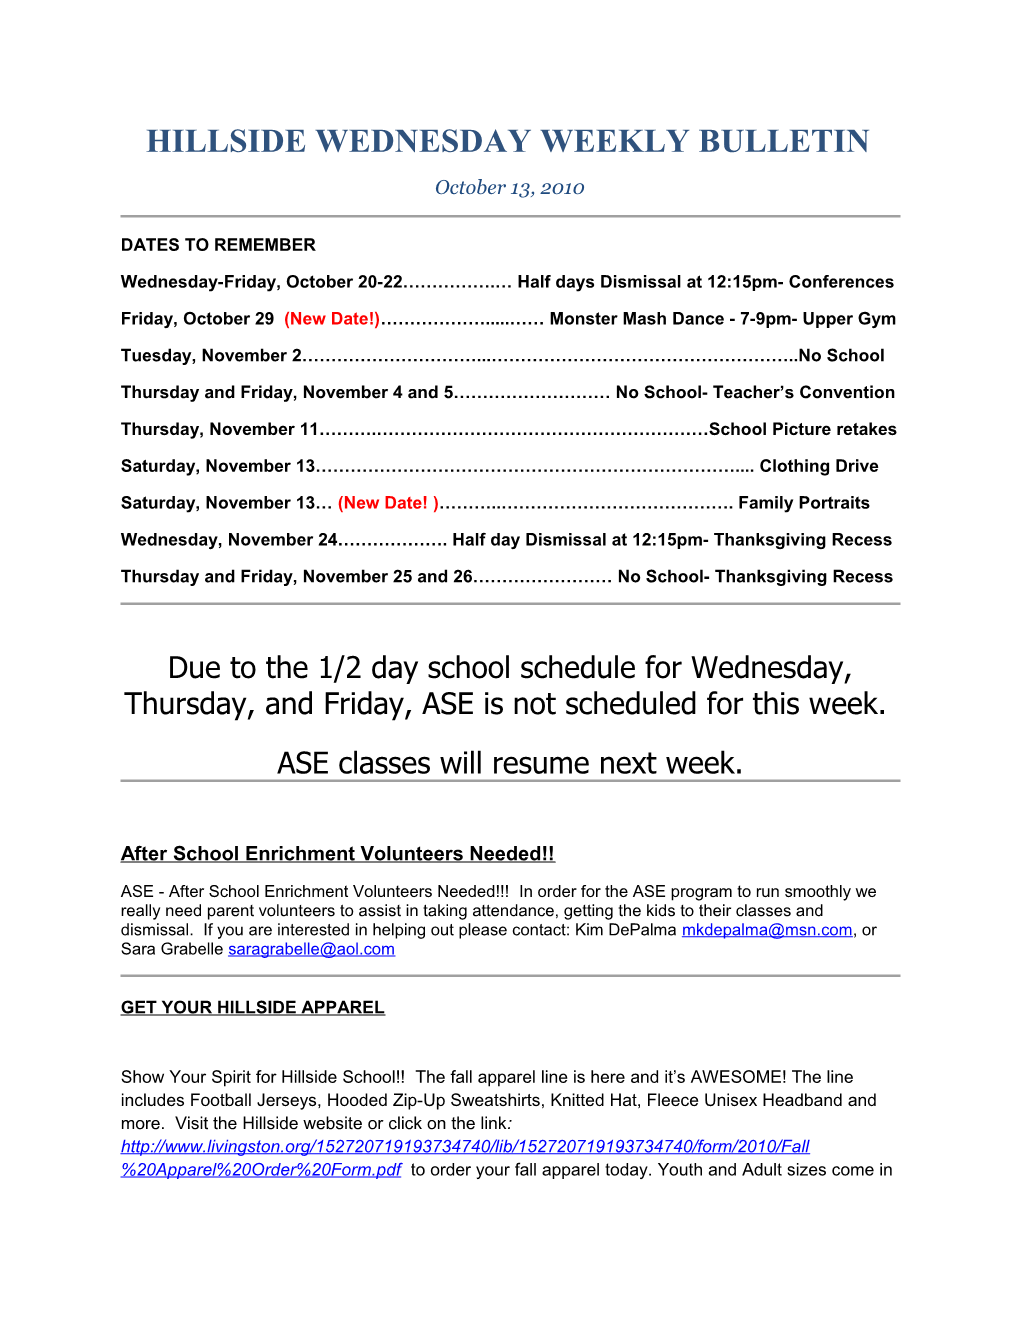 Wednesday-Friday, October 20-22 . Half Days Dismissal at 12:15Pm- Conferences